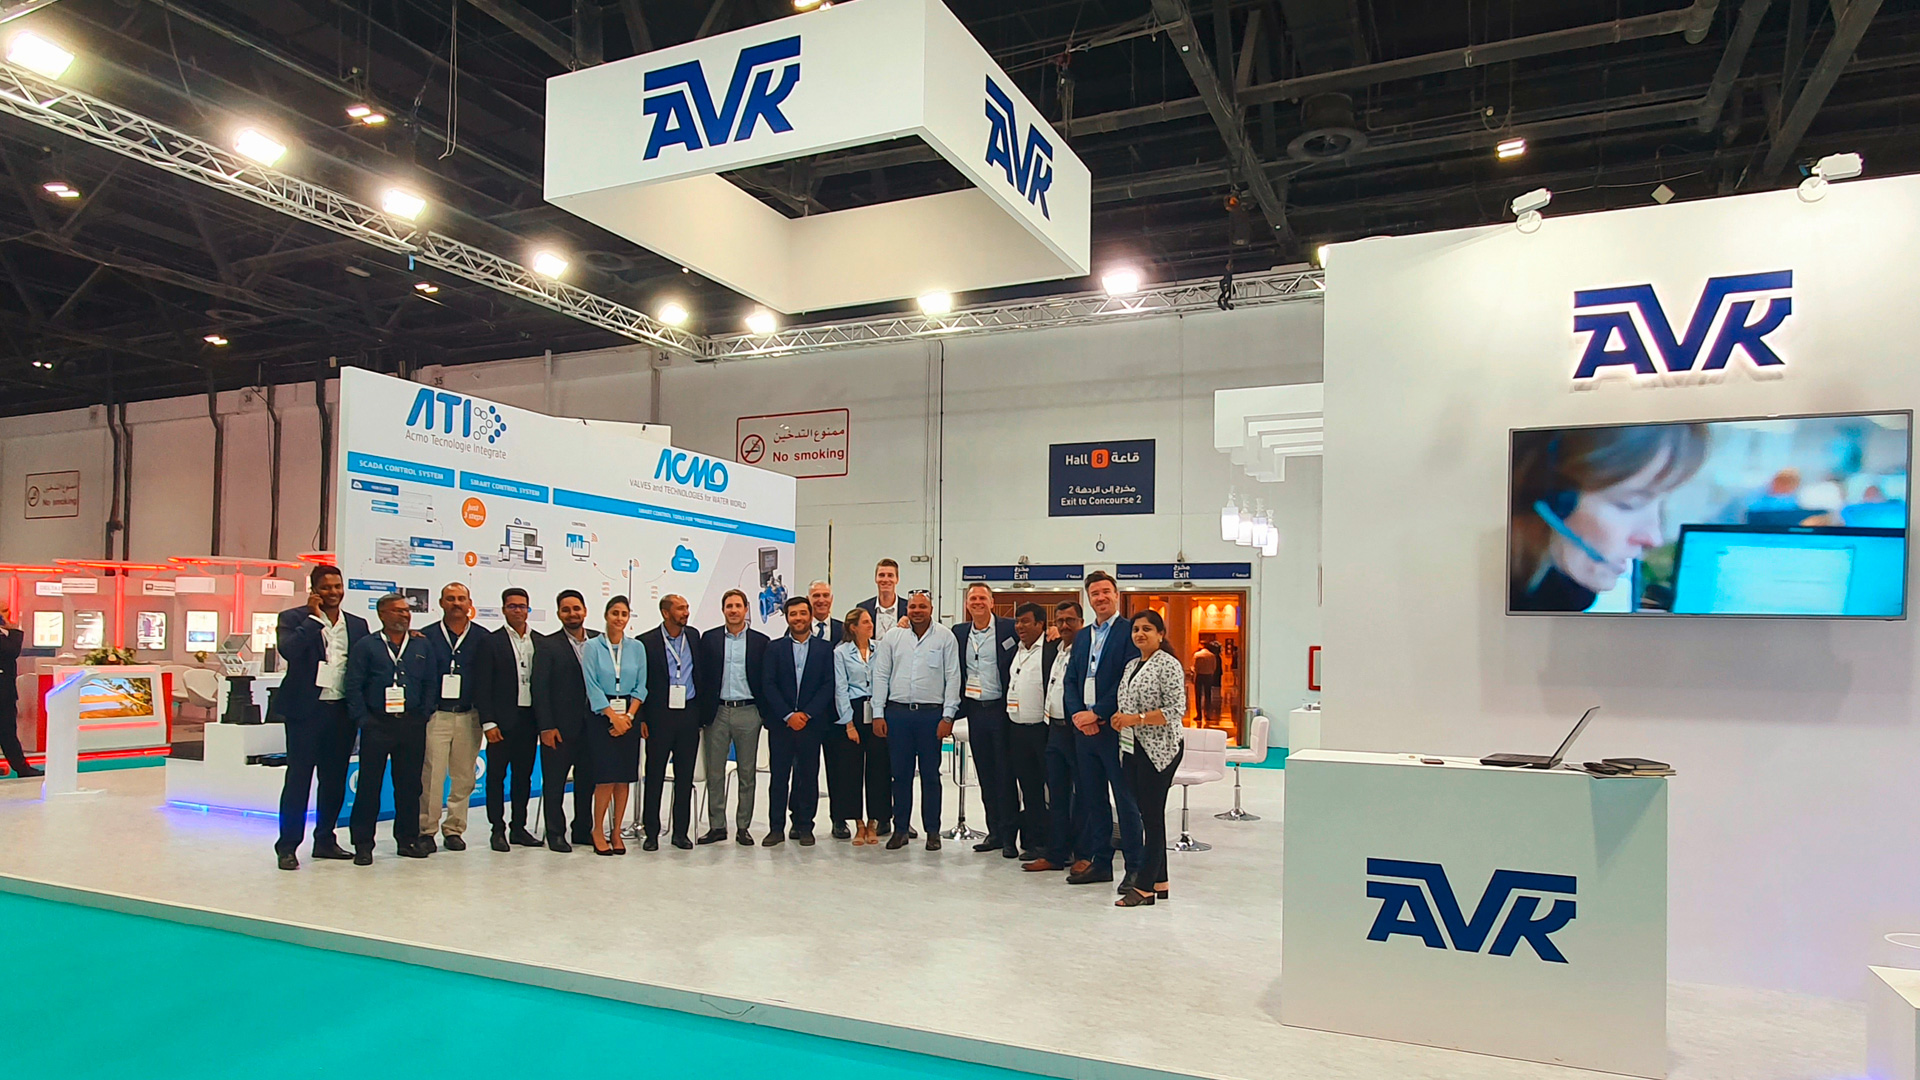 AVK stand with all employees attending WETEX